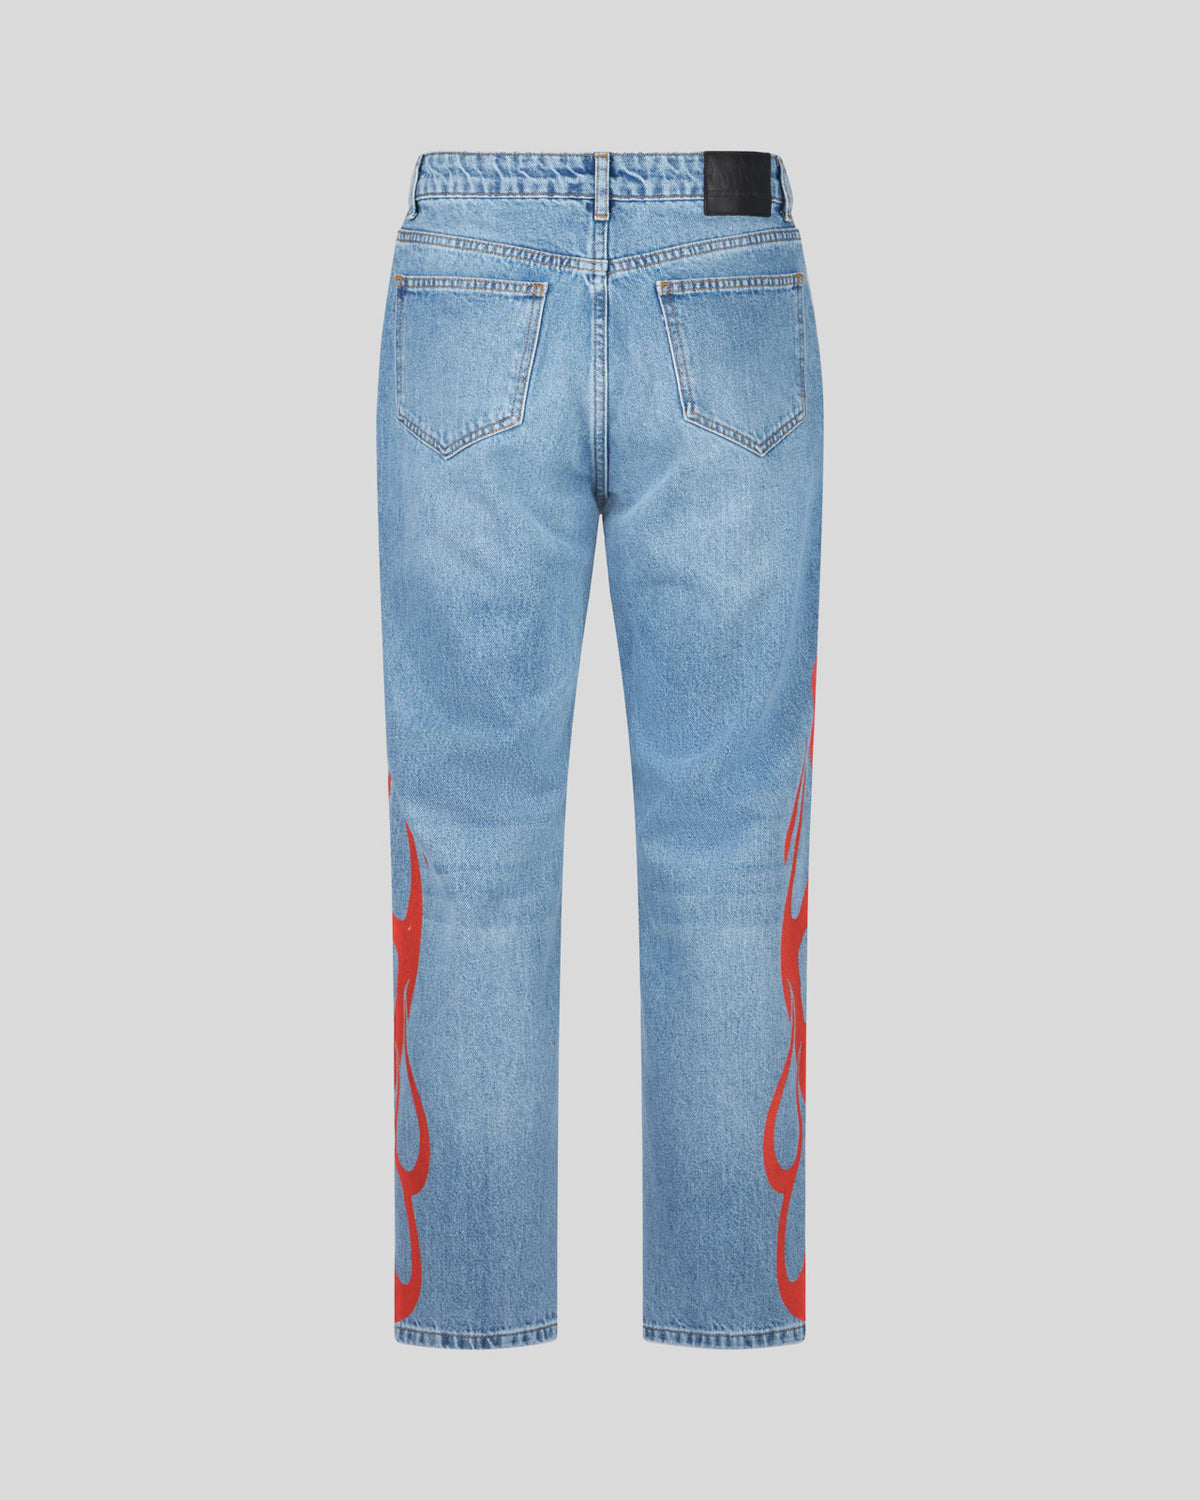 VISION OF SUPER BLUE JEANS WITH RED FLAMES